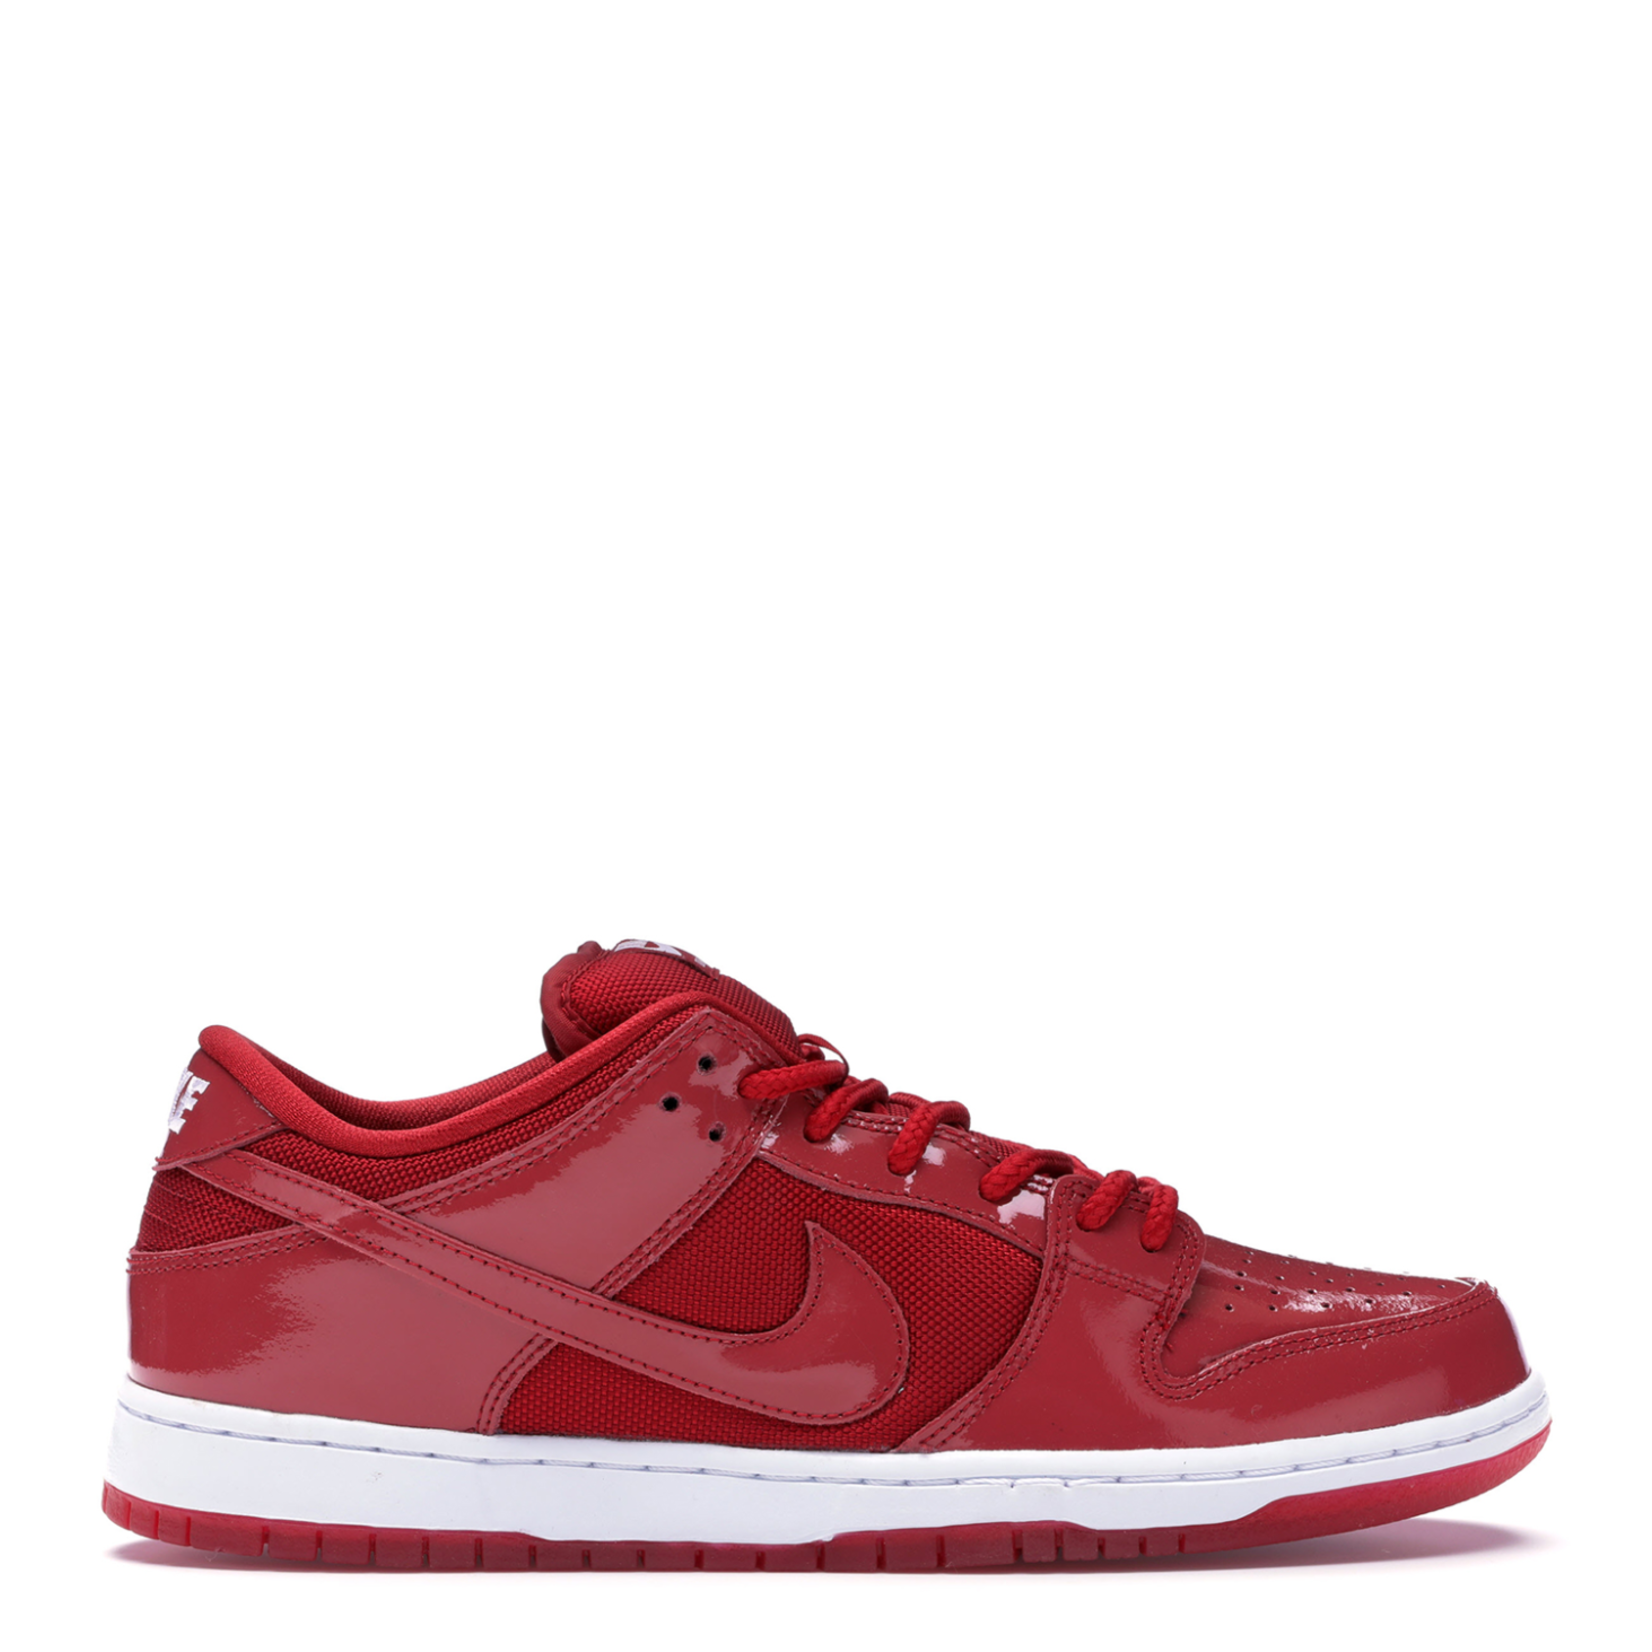 Nike Nike SB Dunk Low Red Patent Leather